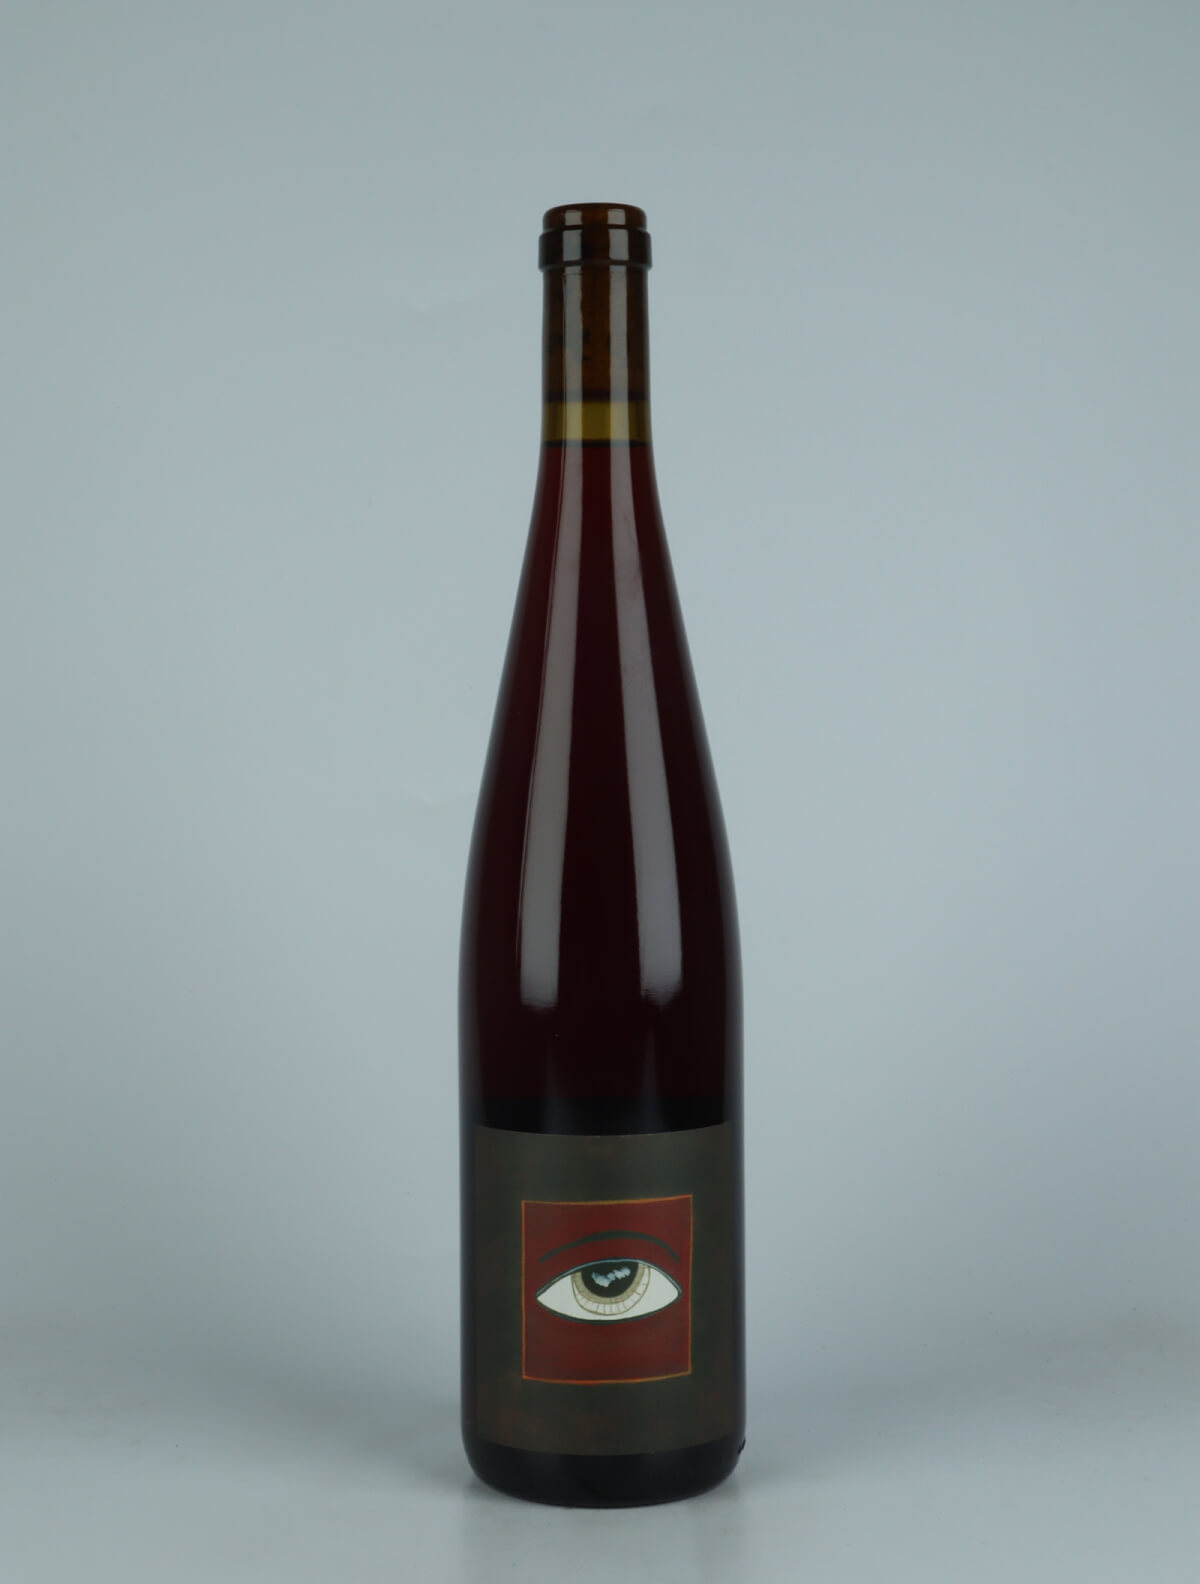 A bottle 2023 Pinot Noir Red wine from Domaine Rietsch, Alsace in France